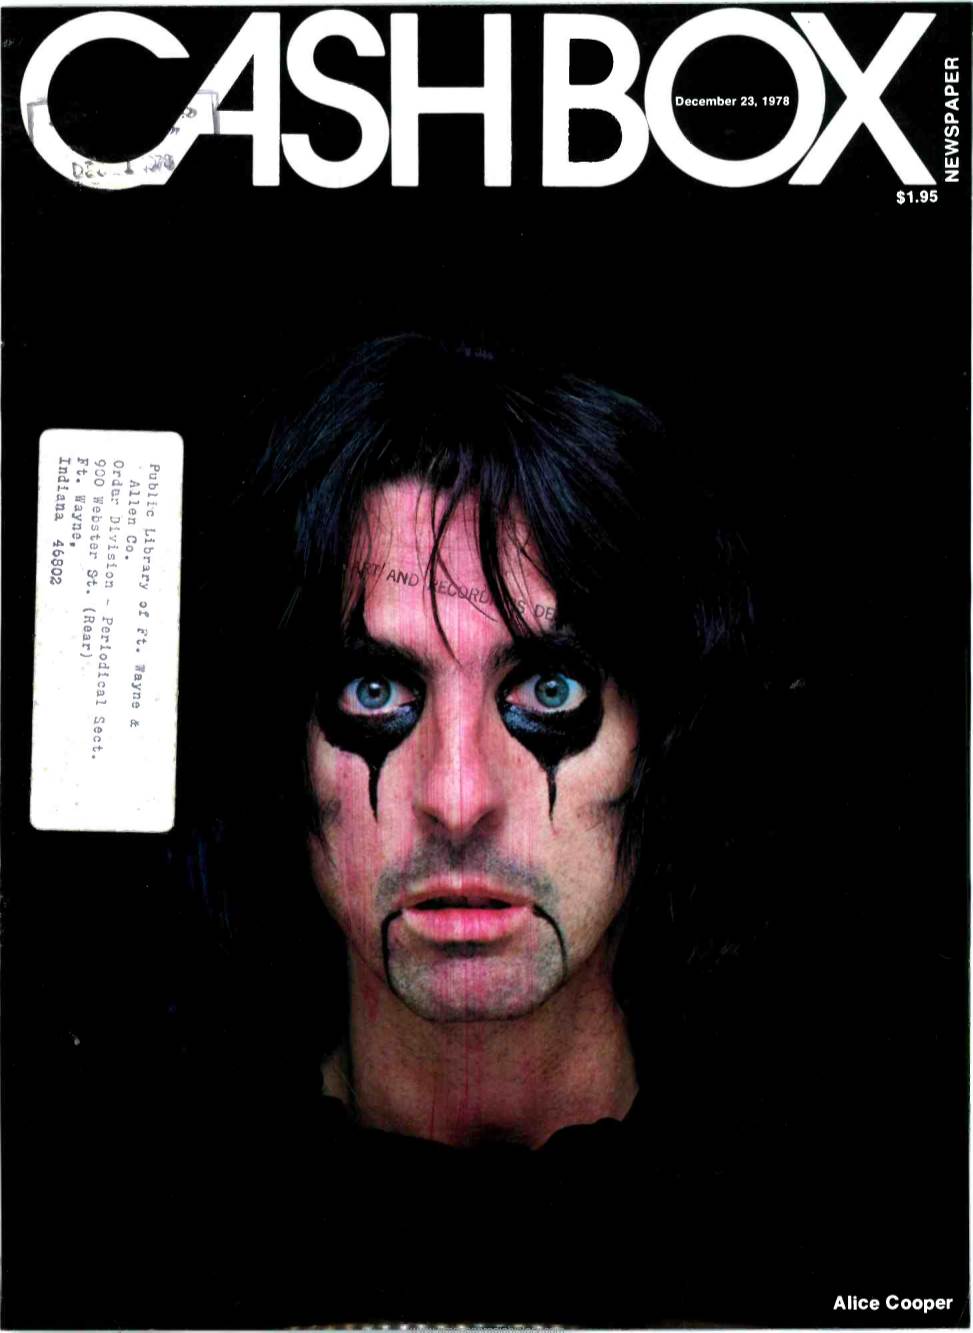 Alice Cooper the Classiest Single Around Goes by the Title "1)A 1)Oo Ile Nde Vous:' 3-10881 the Singer Goes by the Naiiievalerie Carter